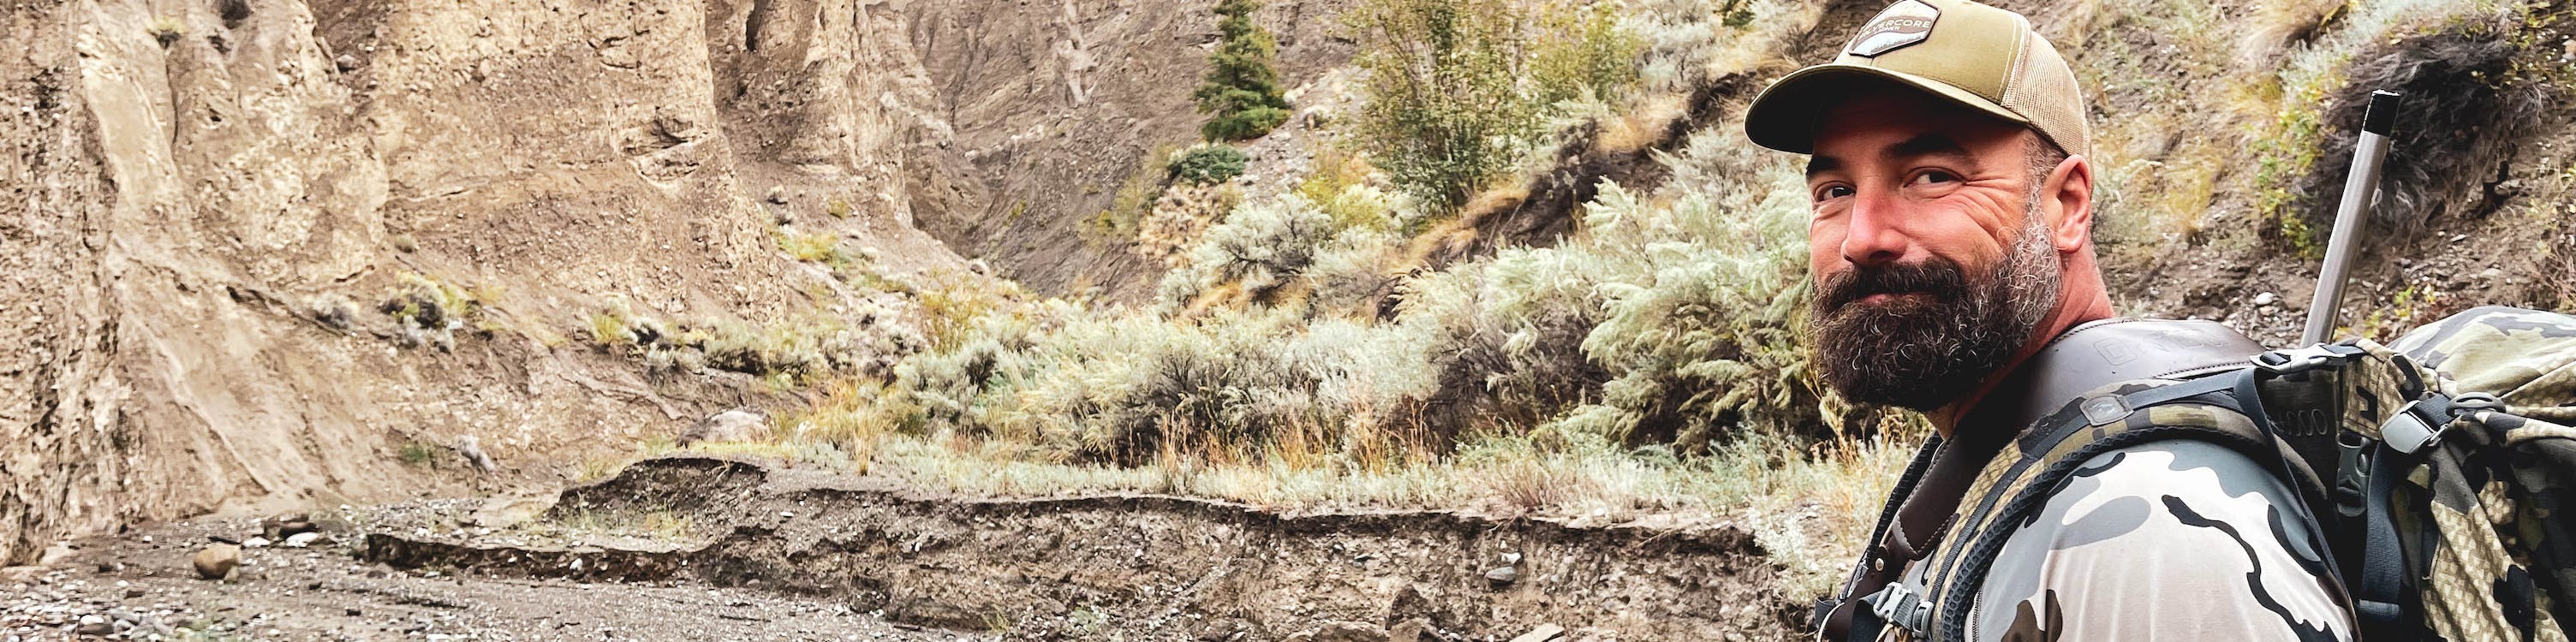 A person wearing camo gear in the mountains